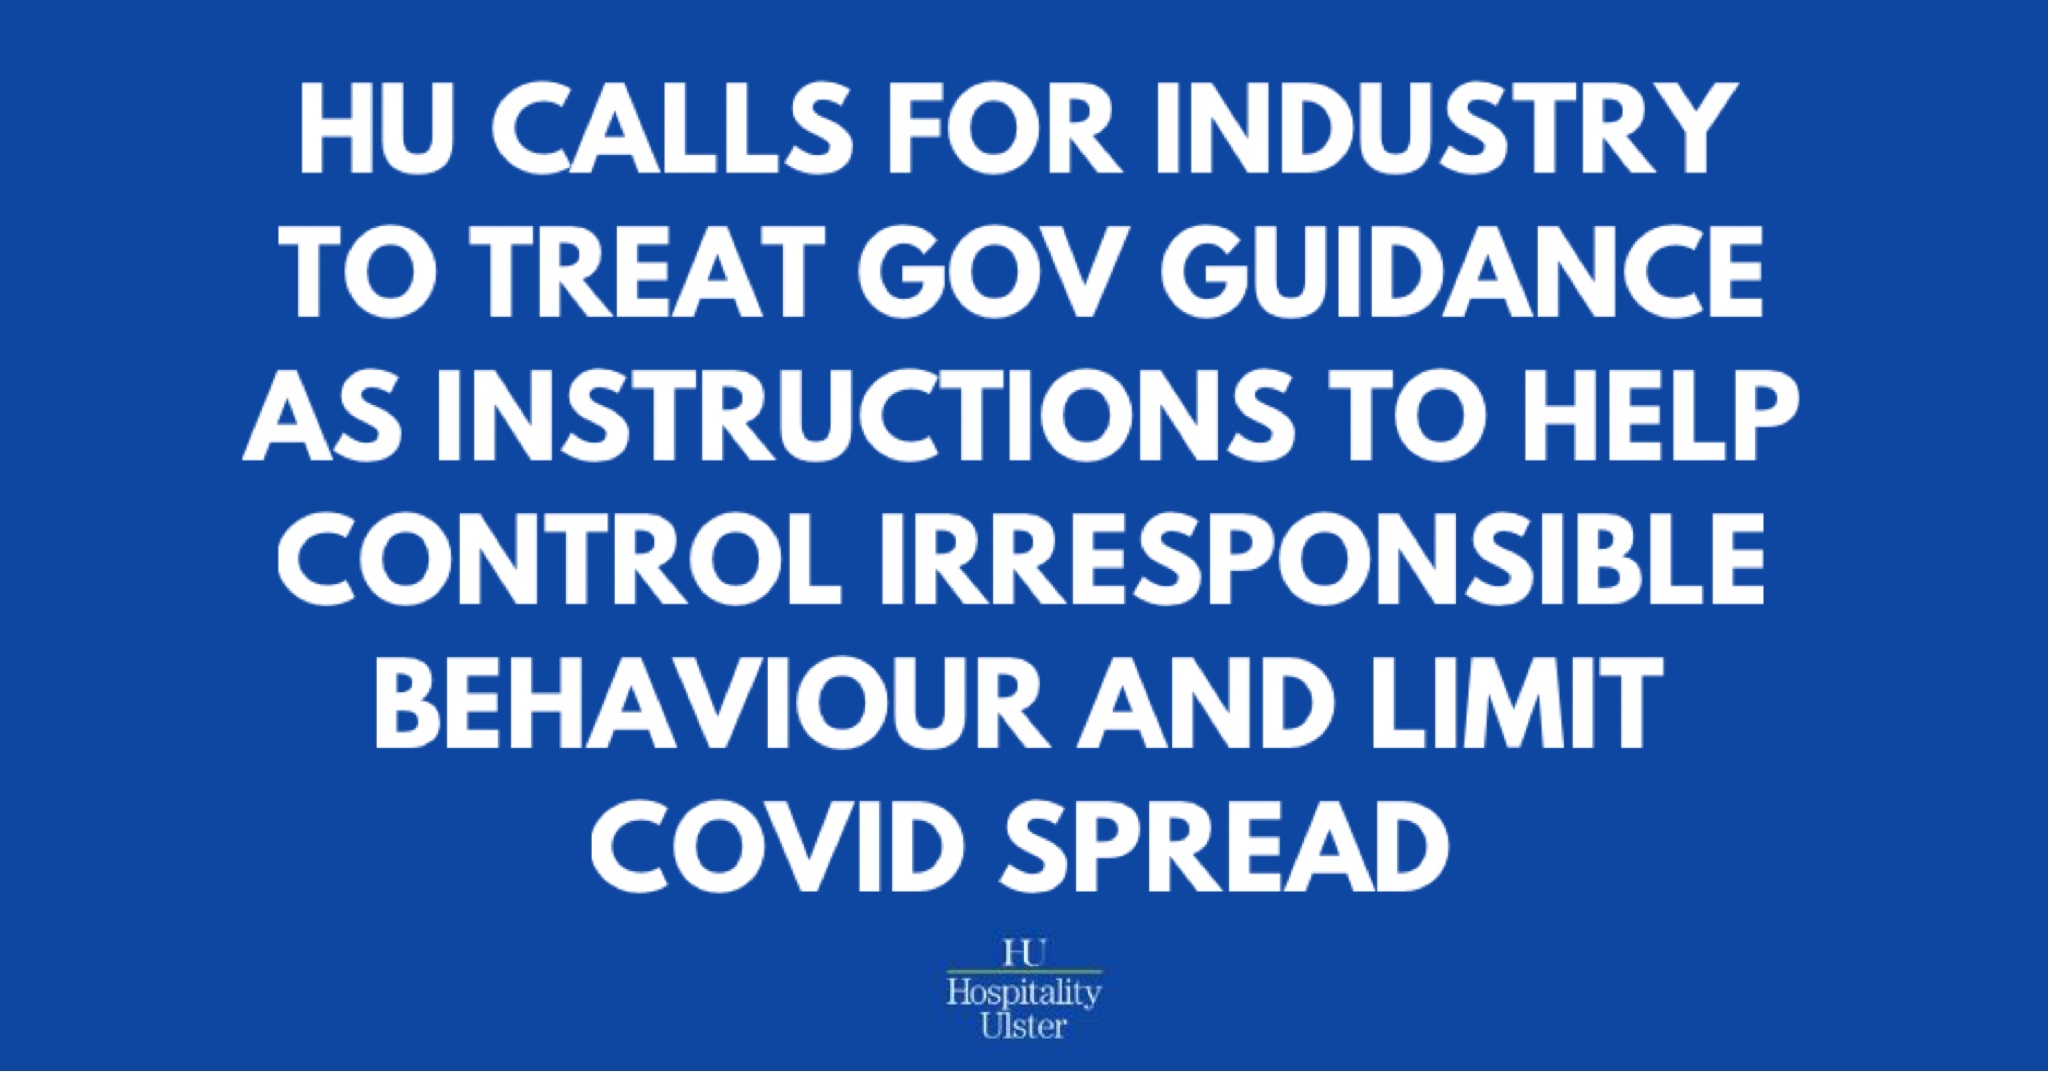 TREAT GOV HOSPITALITY ADVICE AS INSTRUCTION TO HELP CONTROL IRRESPONSIBLE BEHAVIOUR AND LIMIT SPREAD